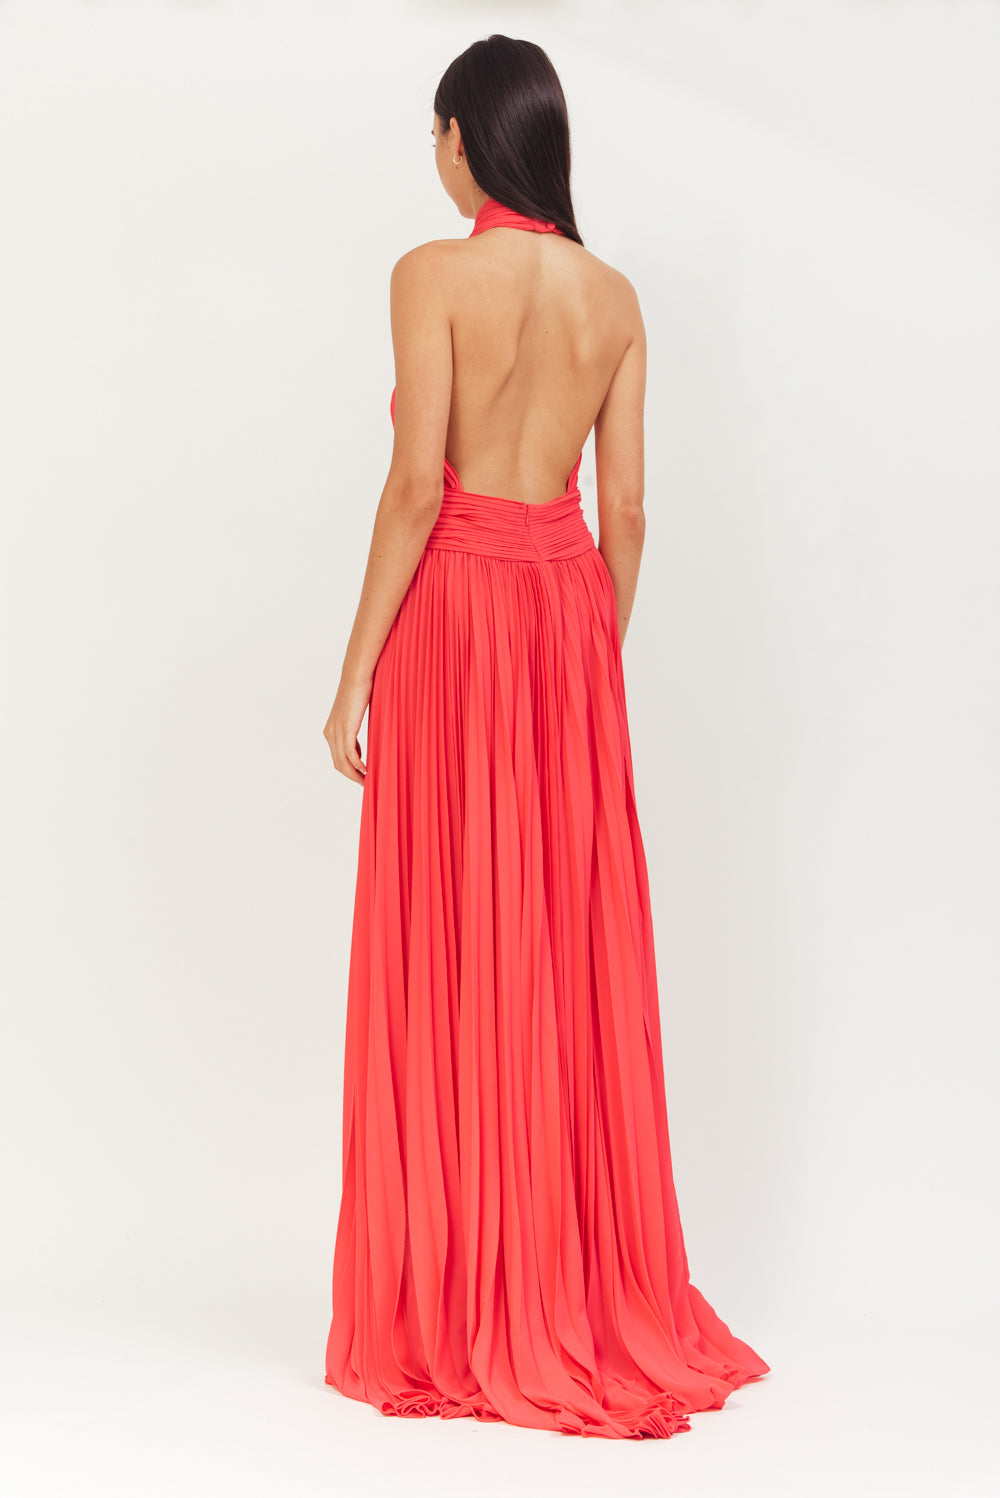 HOTPINK LONG CREPE PLISSE DRESS WITH X IN FRONT AND OPEN BACK